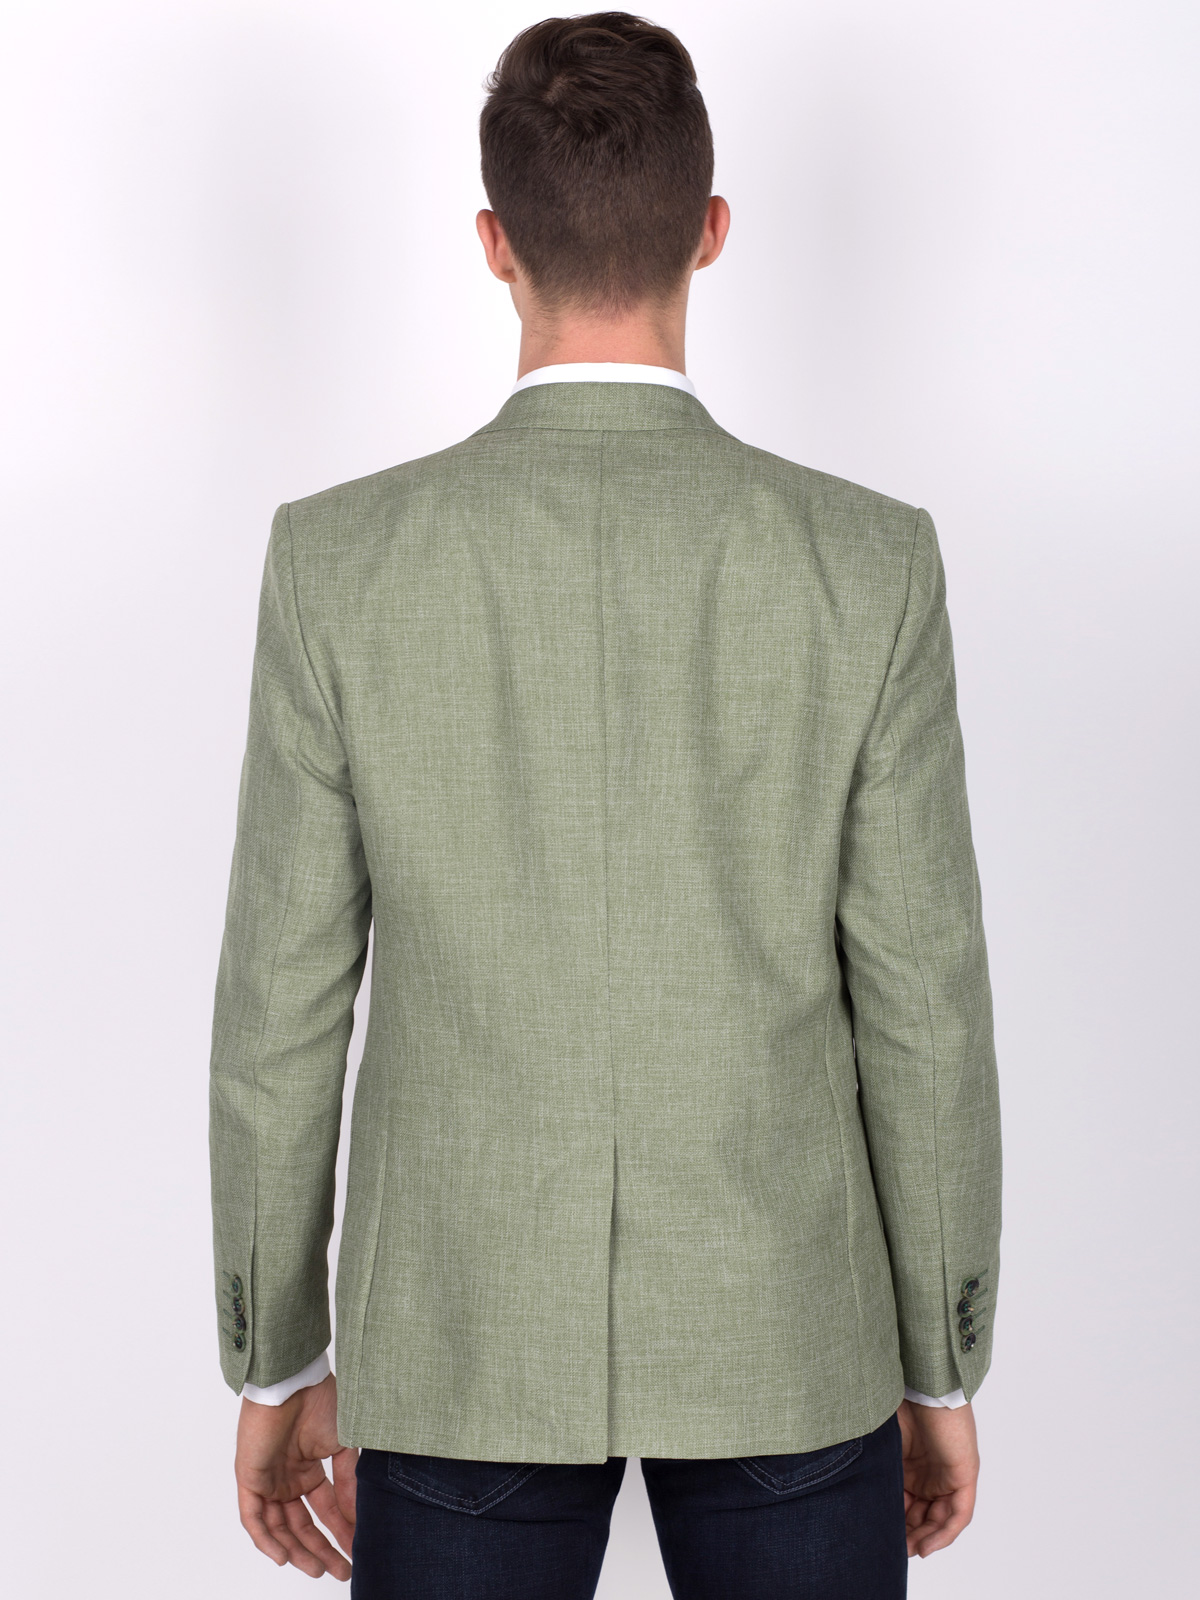 Green jacket made of linen and cotton - 64090 € 50.06 img4